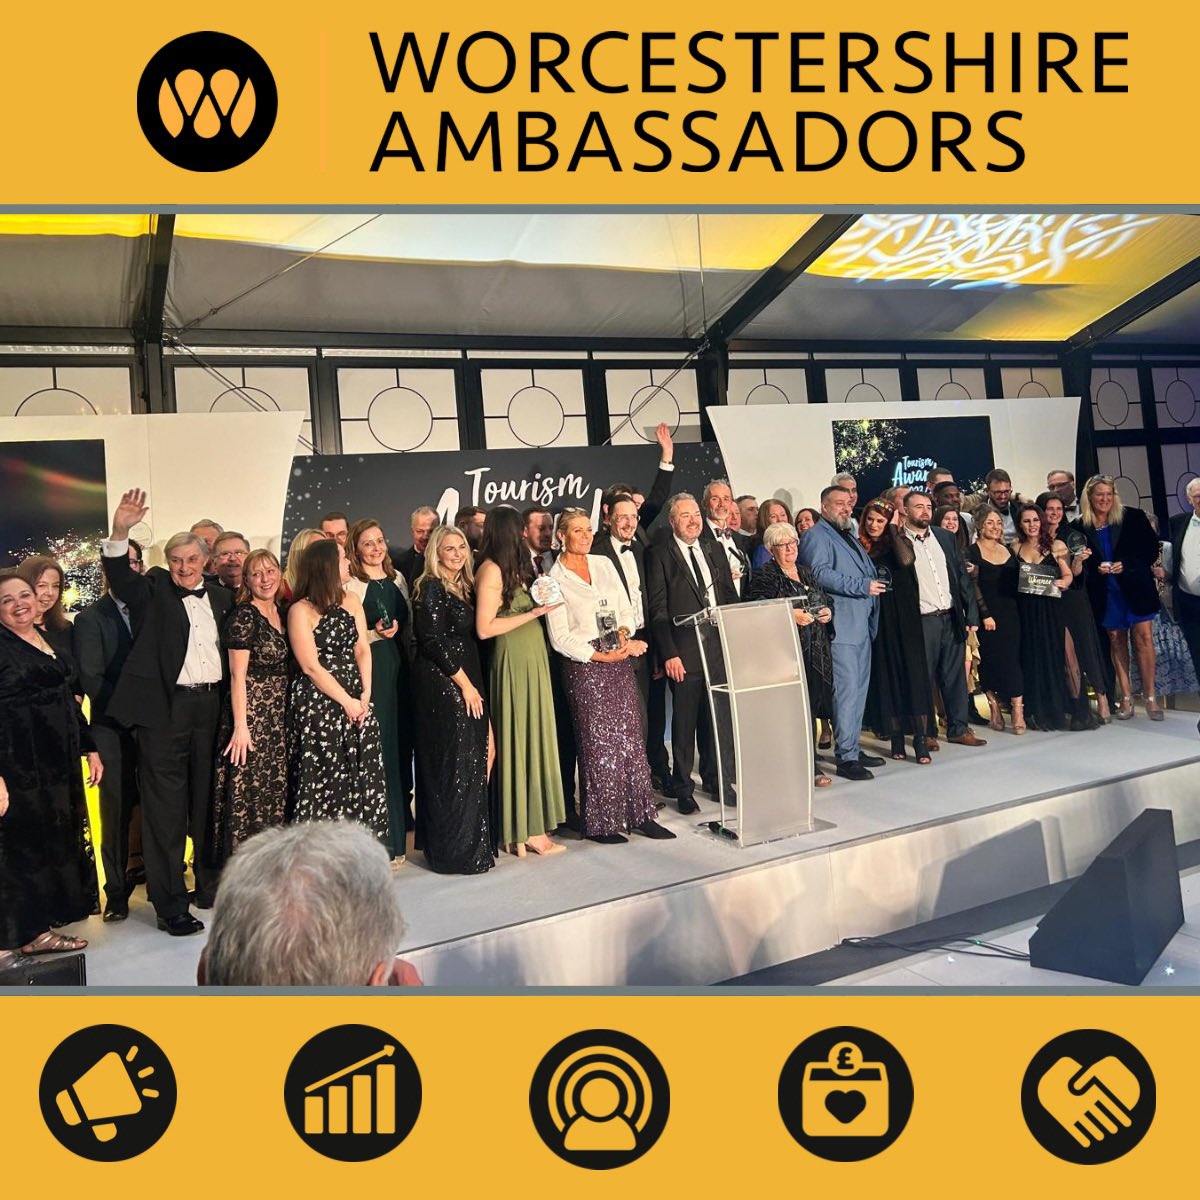 We want to say a huge congratulations to all of the winners and nominees from the @VisitWorcs tourism awards on Friday. 🍾 What an incredible and thriving tourism sector Worcestershire has. It’s certainly an exciting time to visit Worcestershire! 🧳 #WorcestershireHour